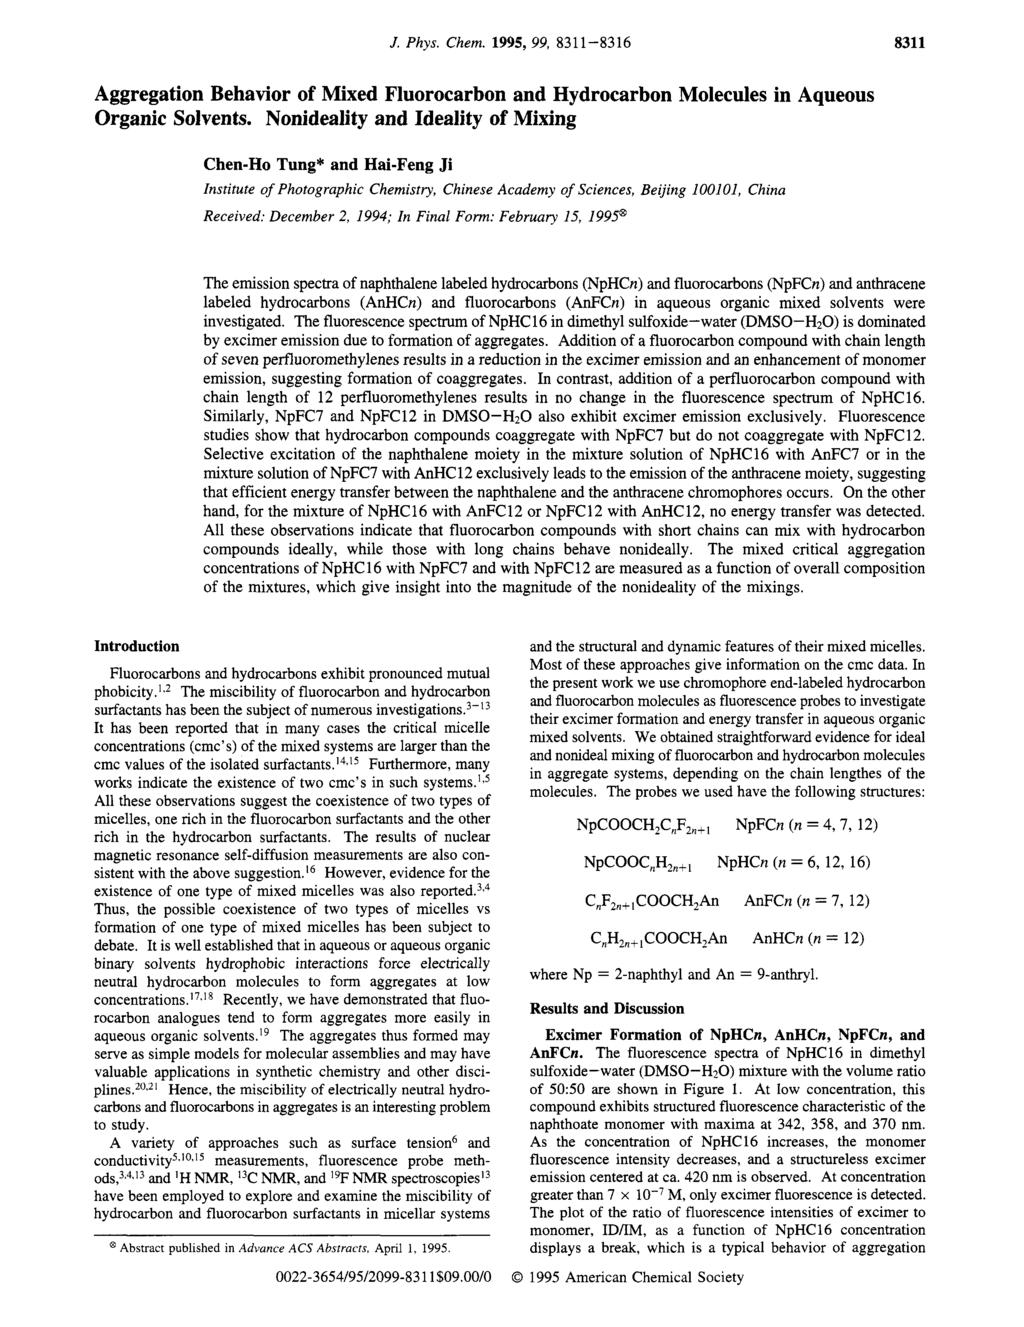 J. Phys. Chem. 1995, 99, 8311-8316 8311 Aggregation Behavior of Mixed Fluorocarbon and Hydrocarbon Molecules in Aqueous Organic Solvents.